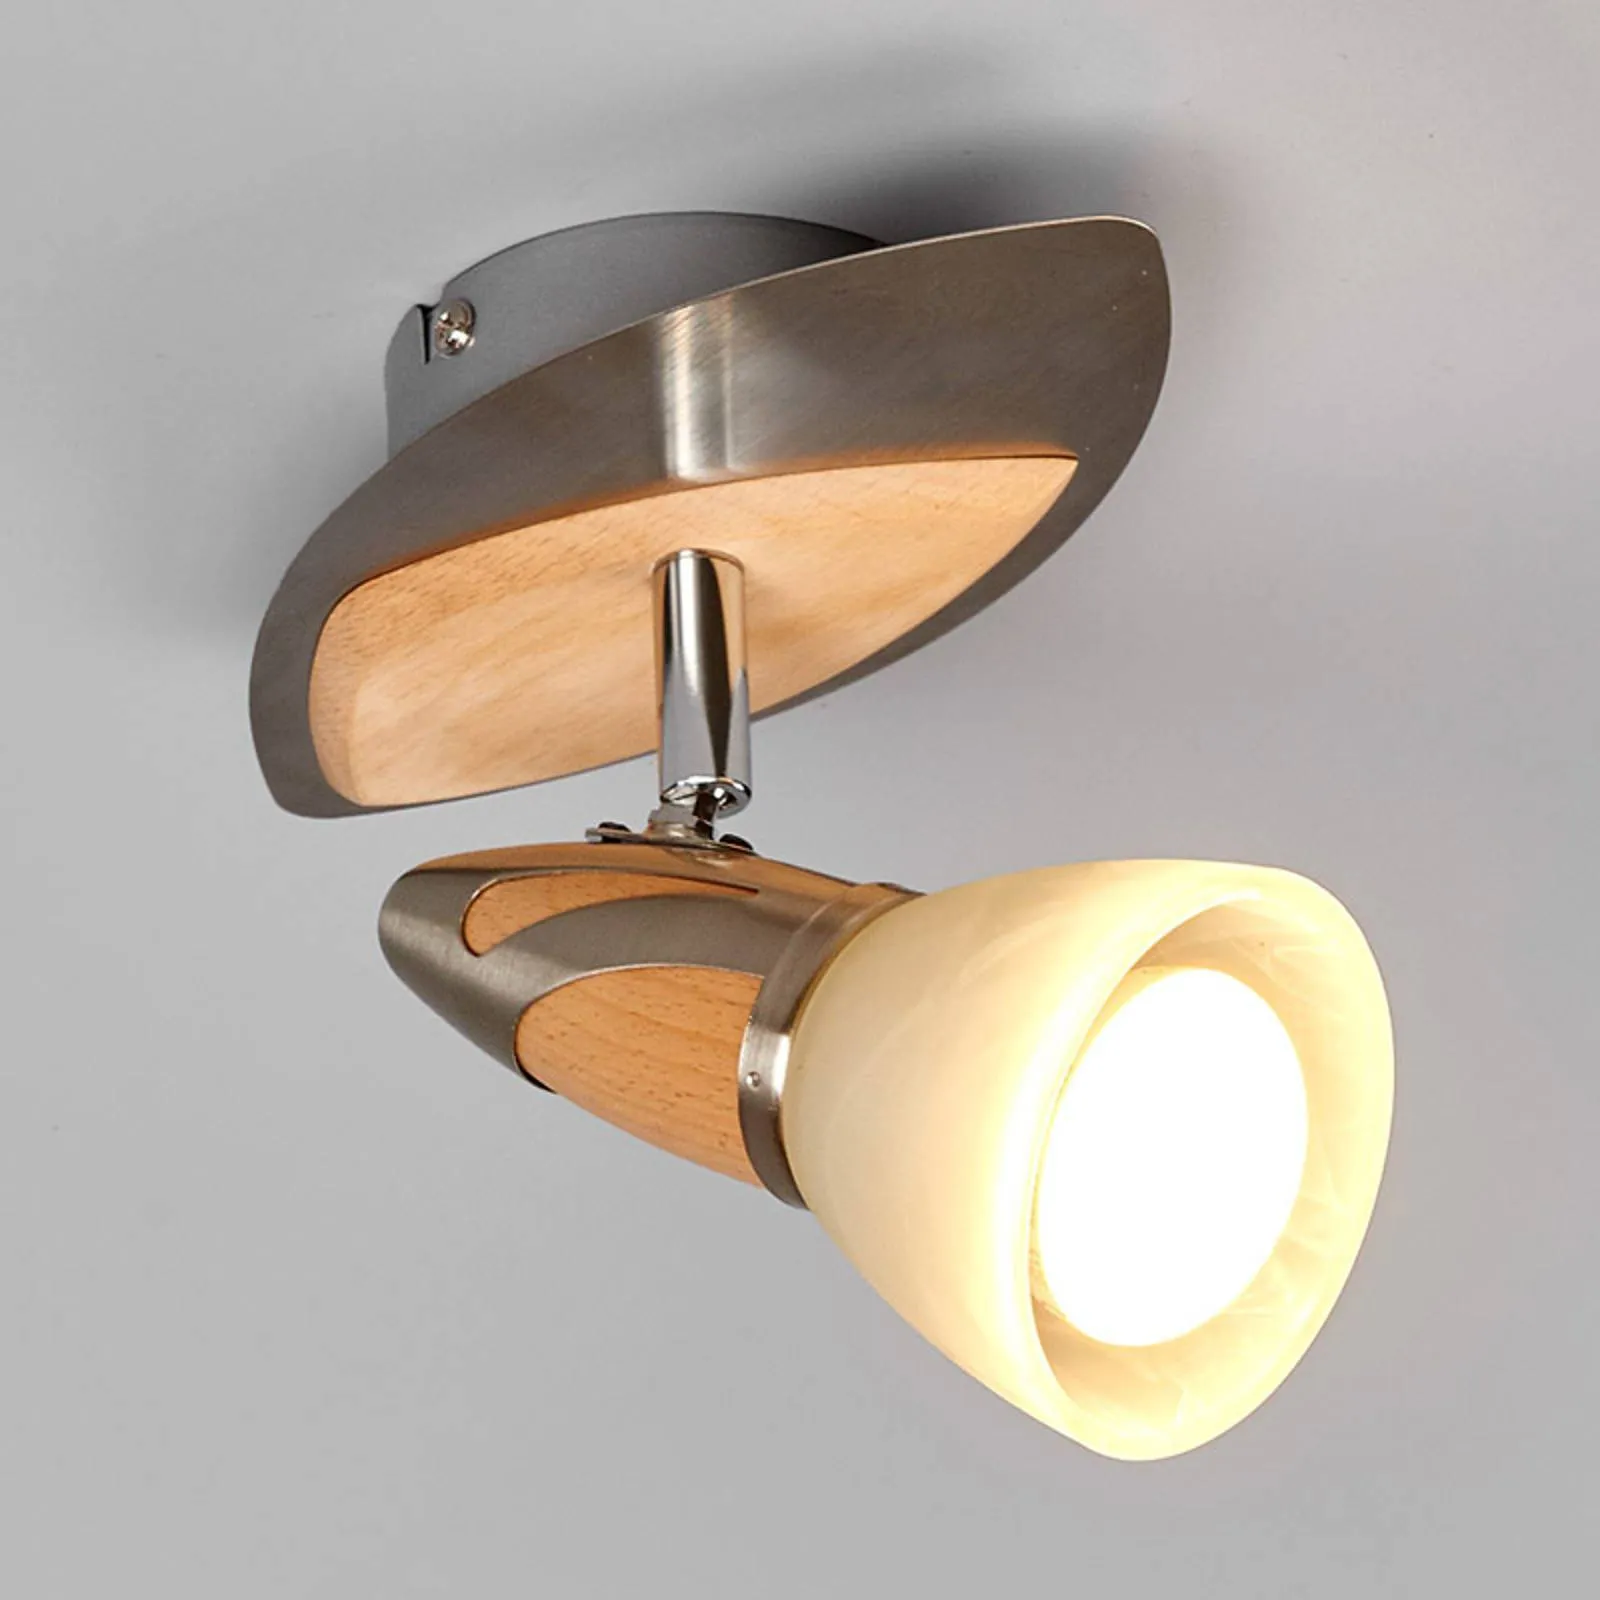 Spotlight Marena with a wooden finish, E14 R50 LED